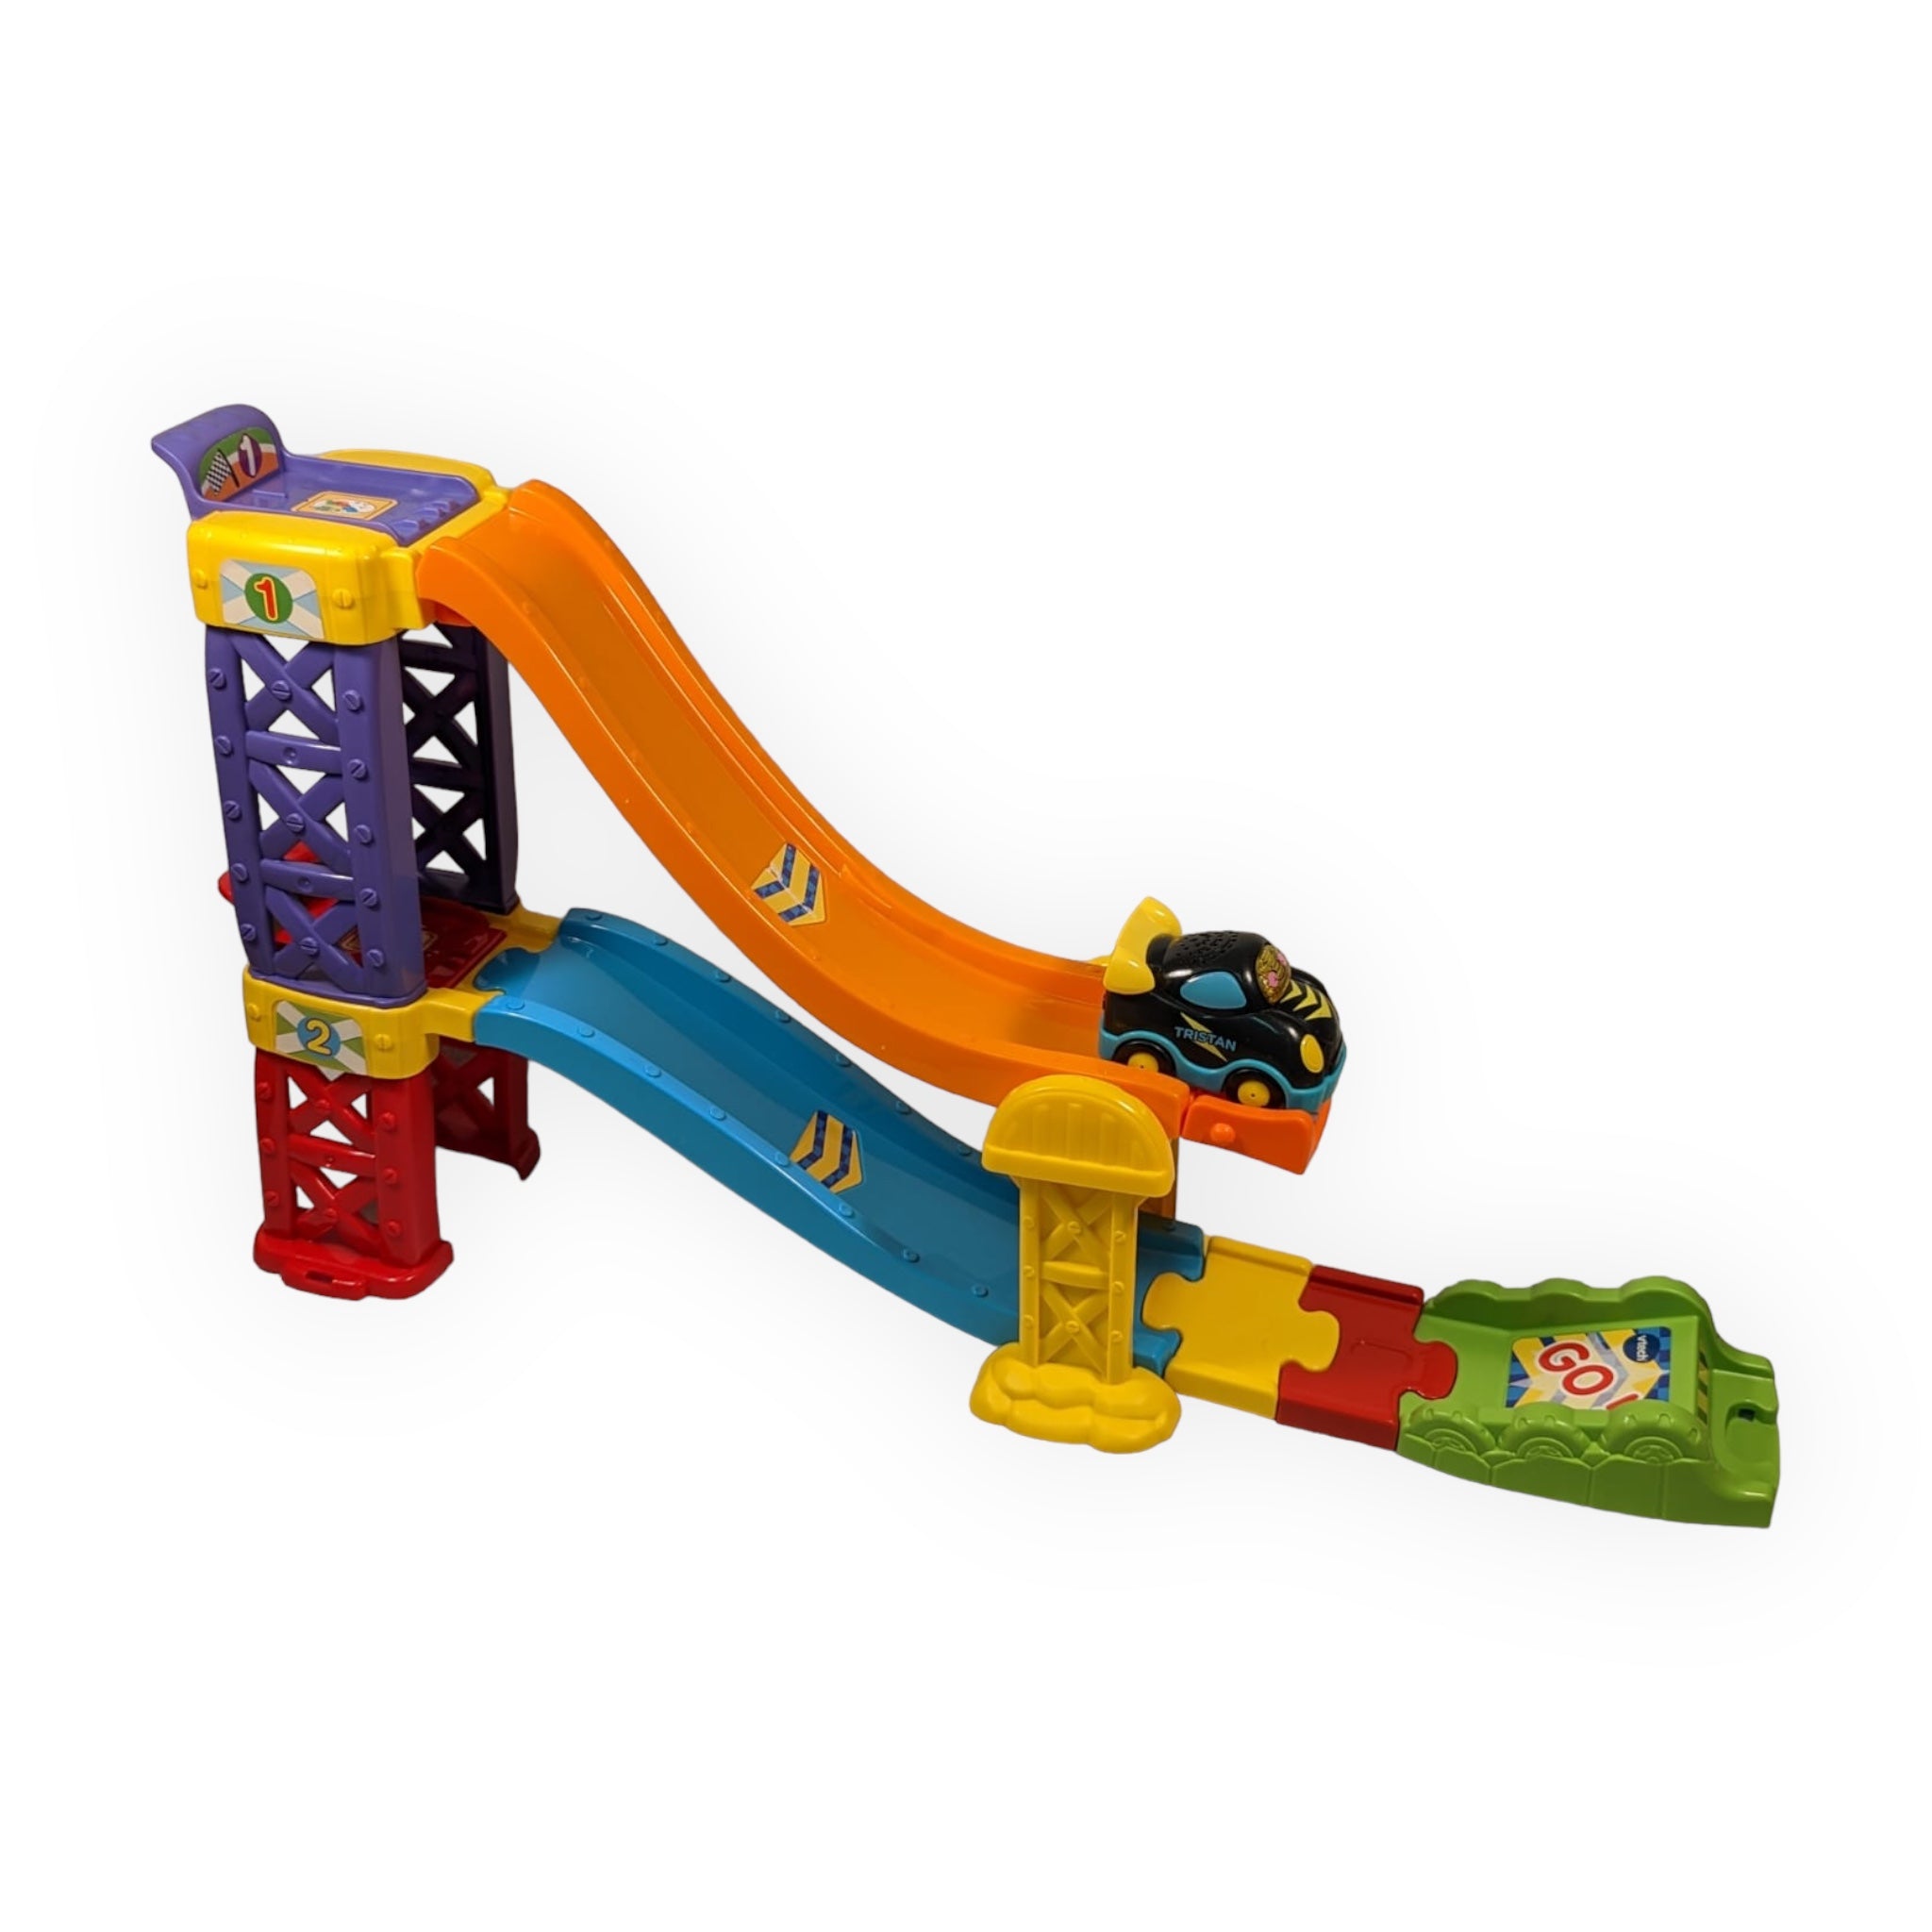 VTech Go! Go! Smart Wheels - 3 in 1 Launch and Play Raceway